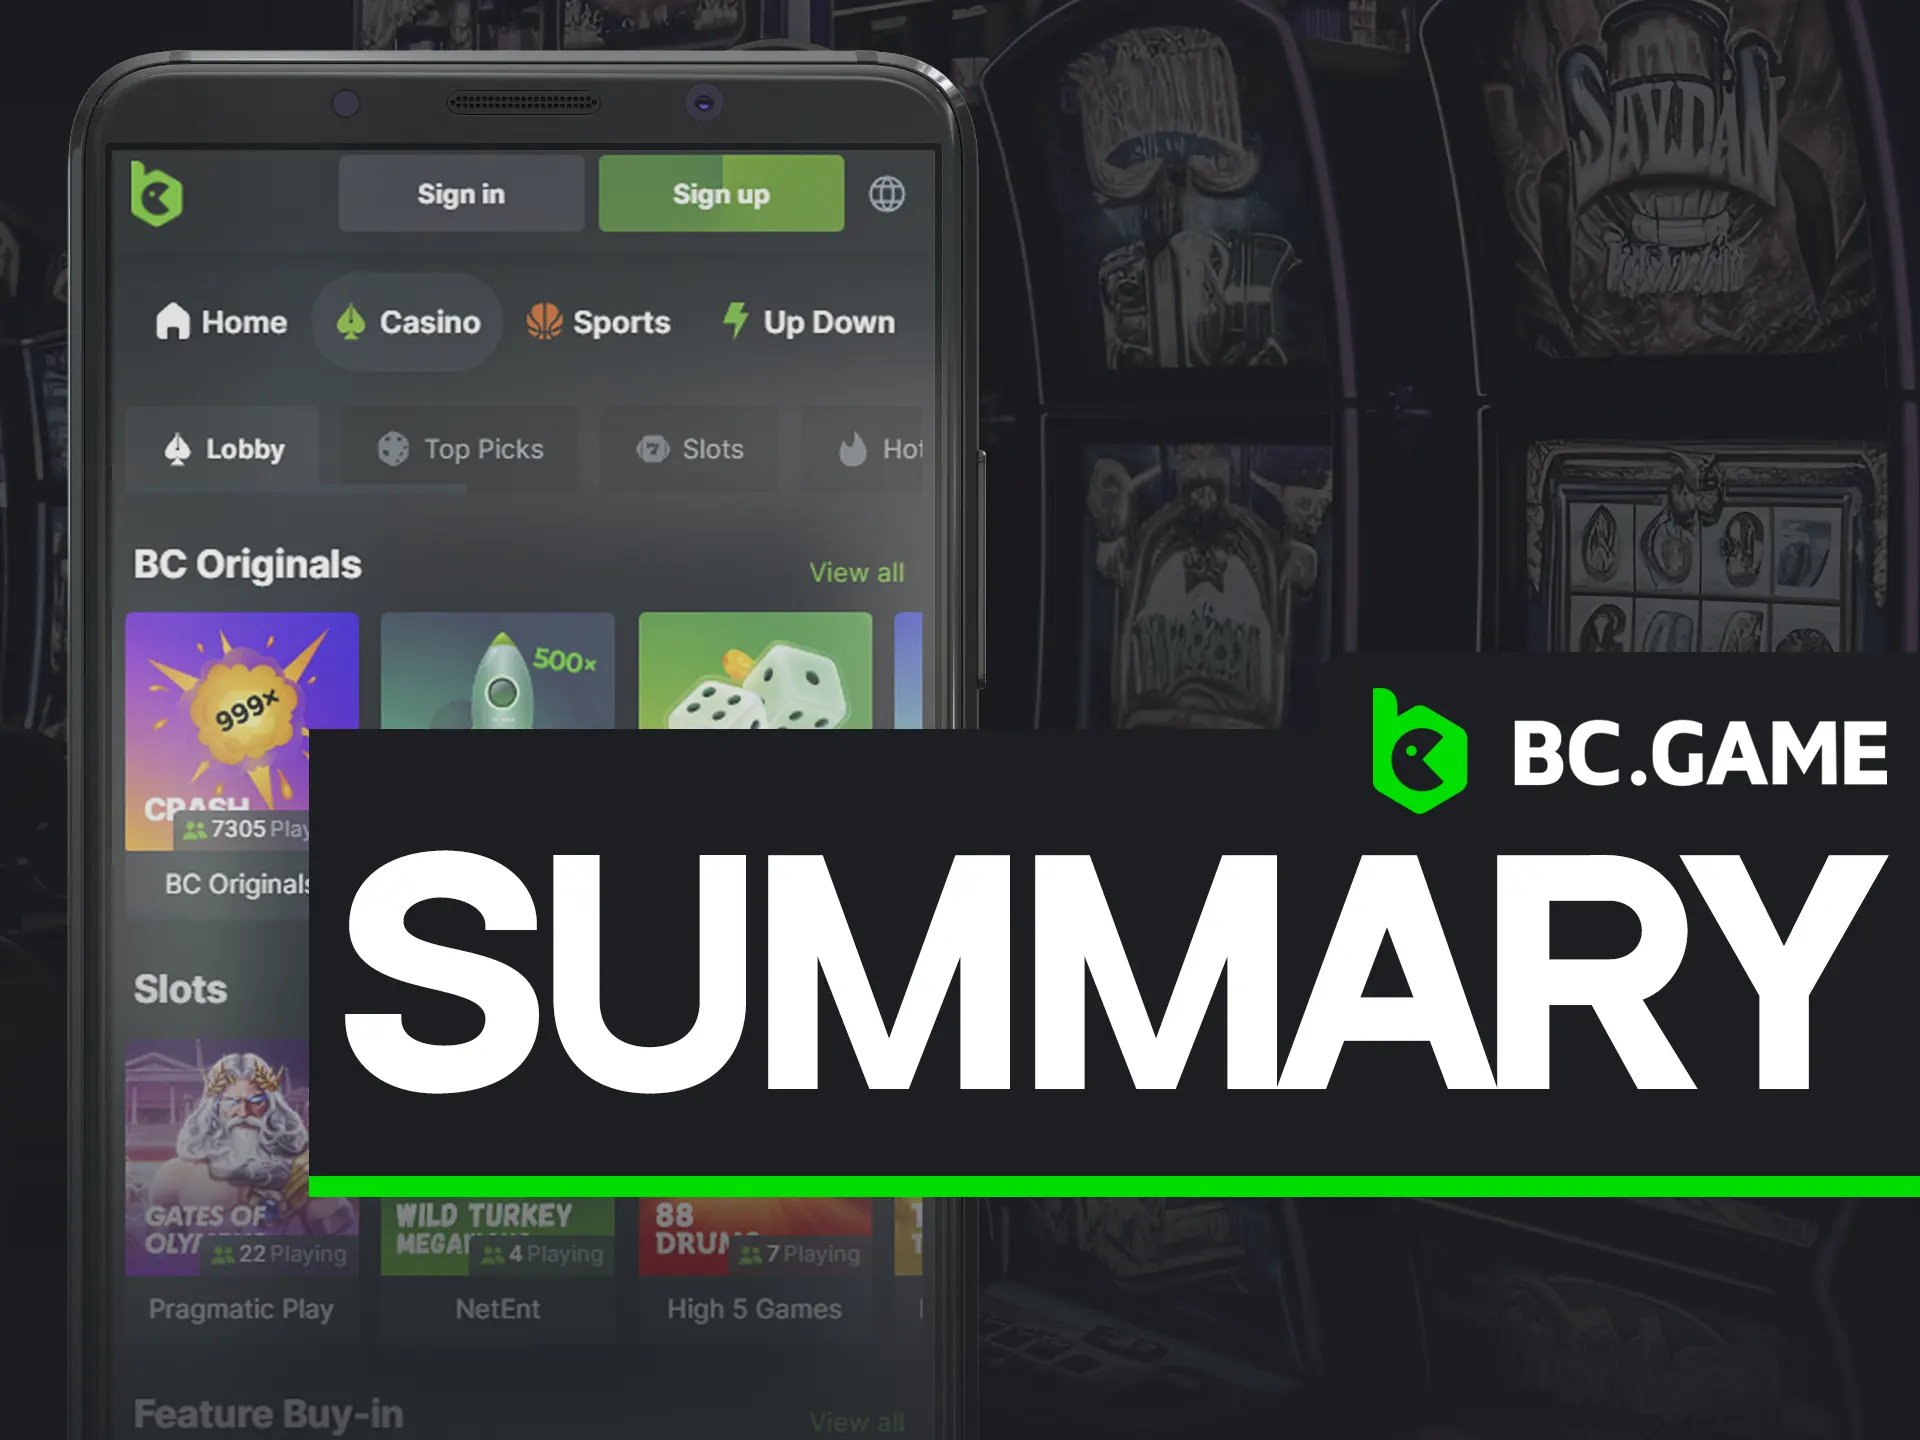 BC Game Casino app is legal and secure.